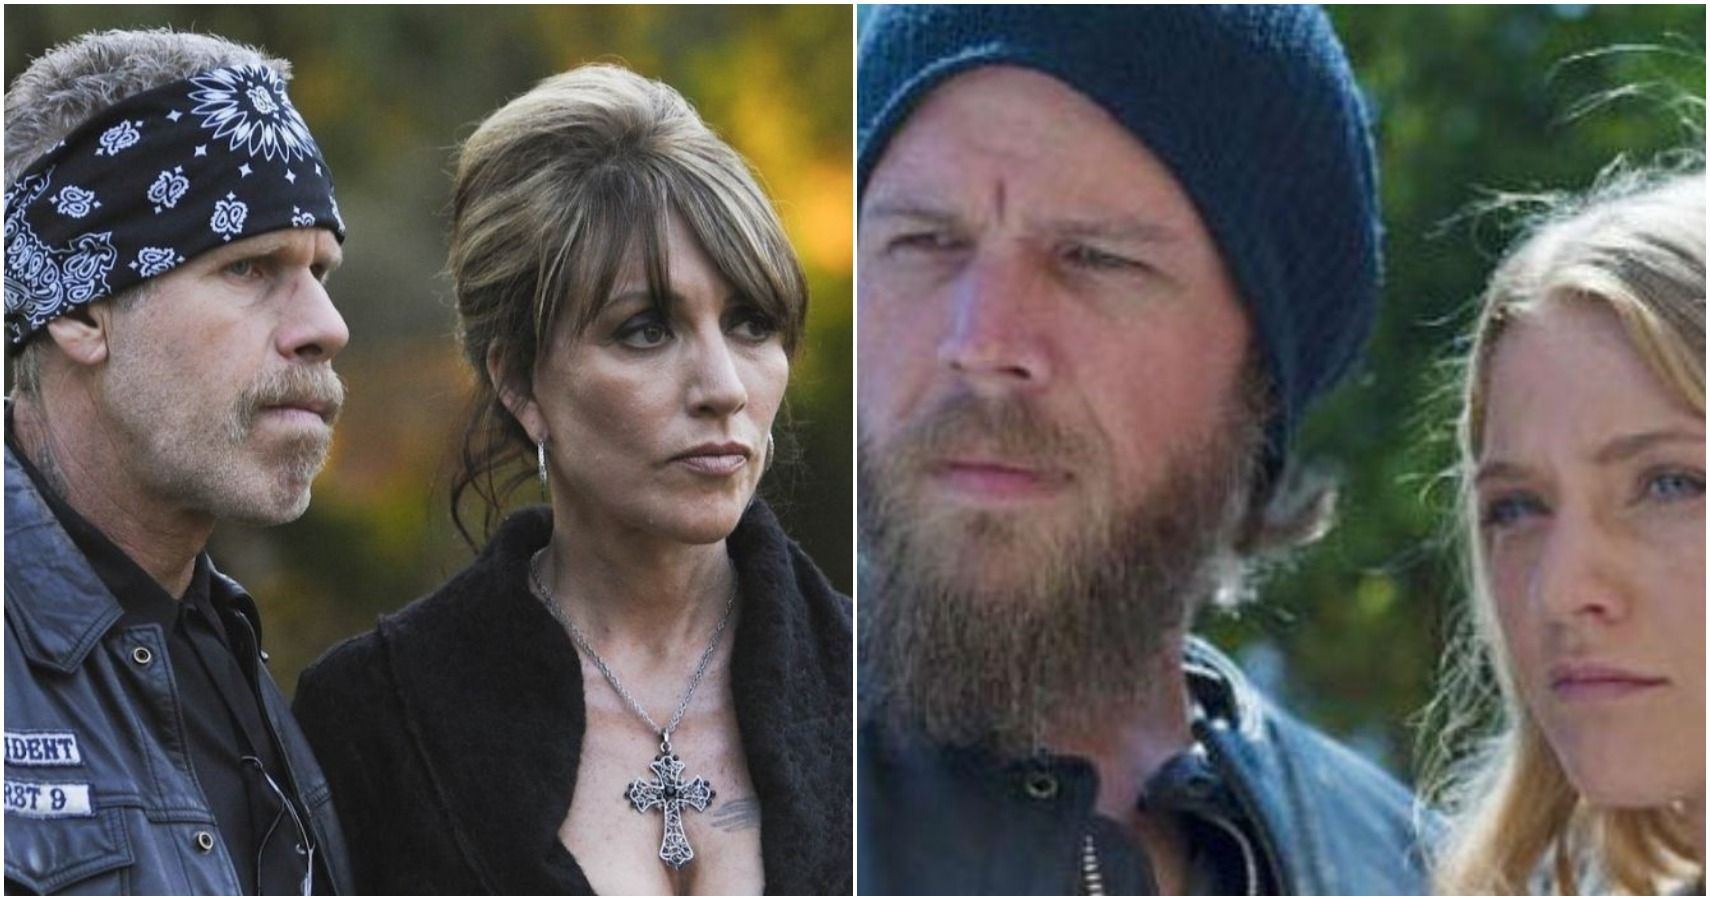 Sons of Anarchy 5 Couples That Are Perfect Together (& 5 That Make No Sense)